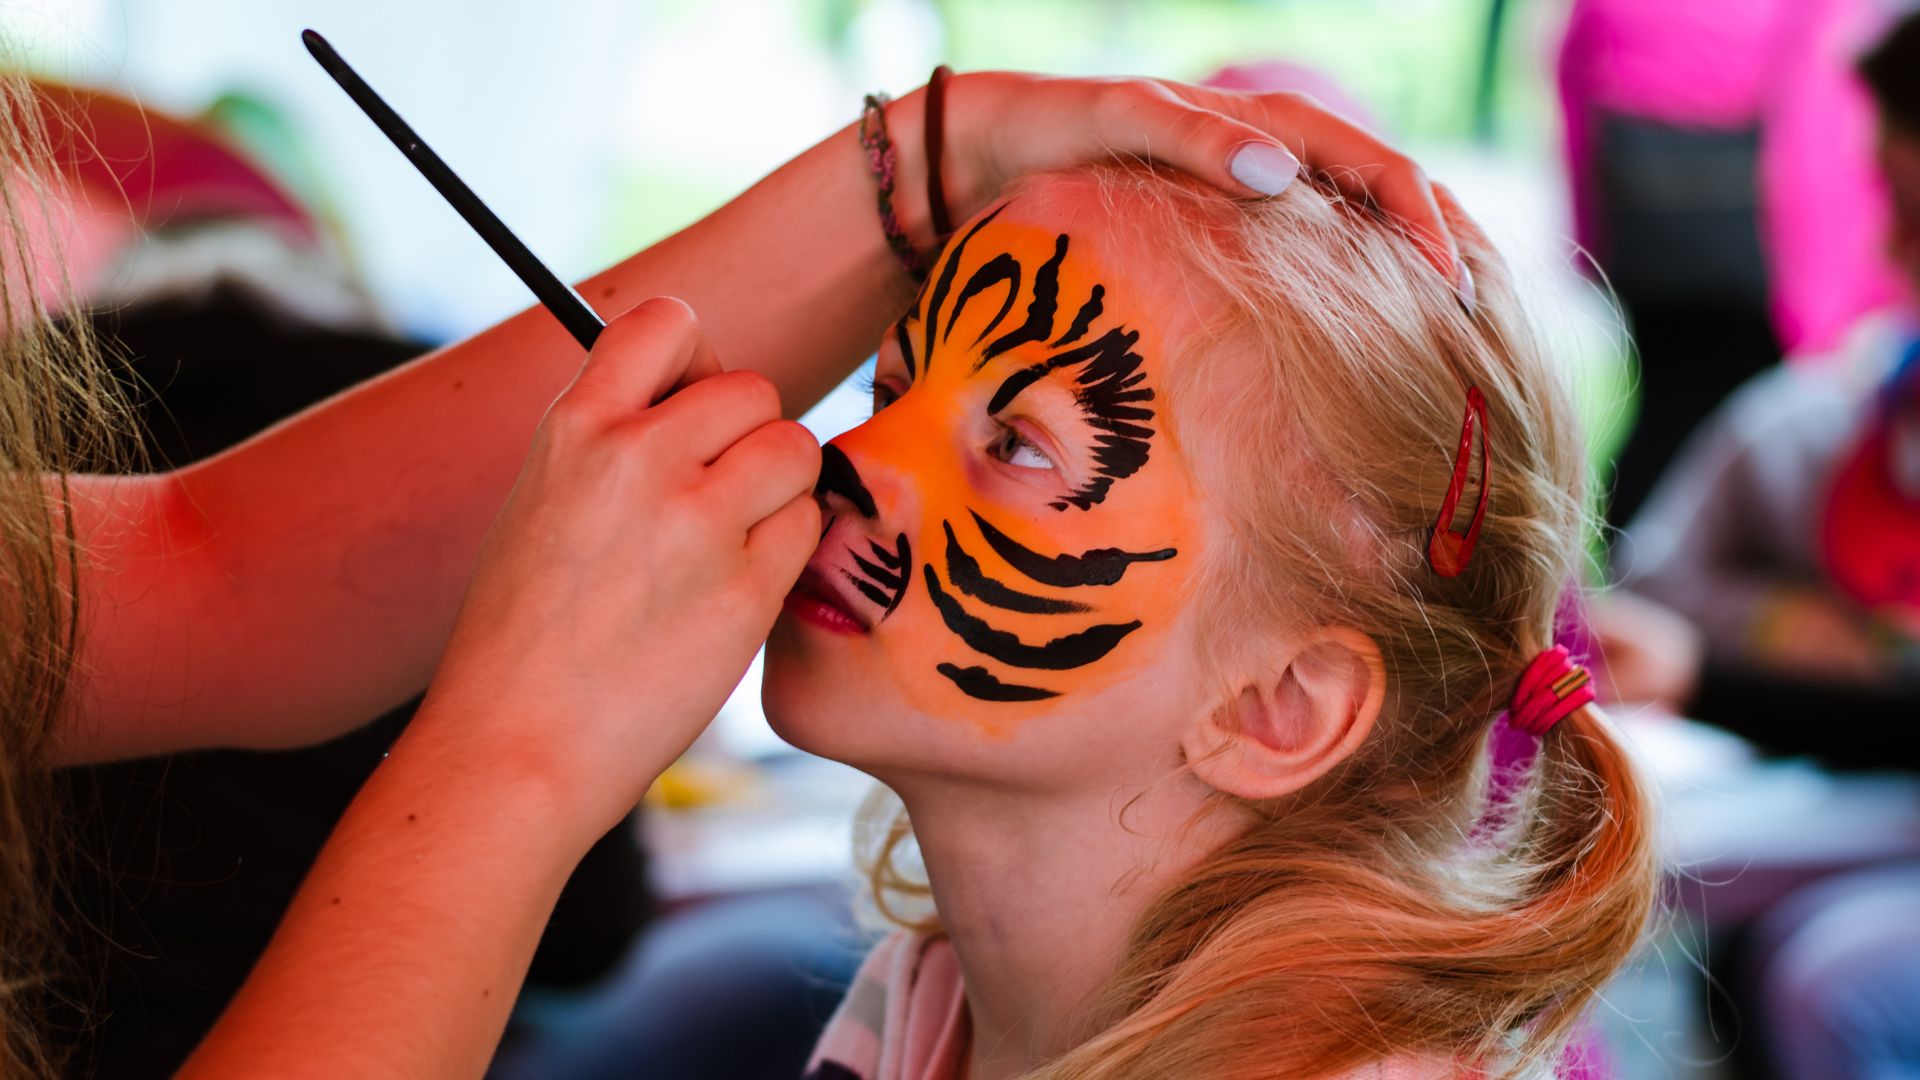 Stock image of face painting